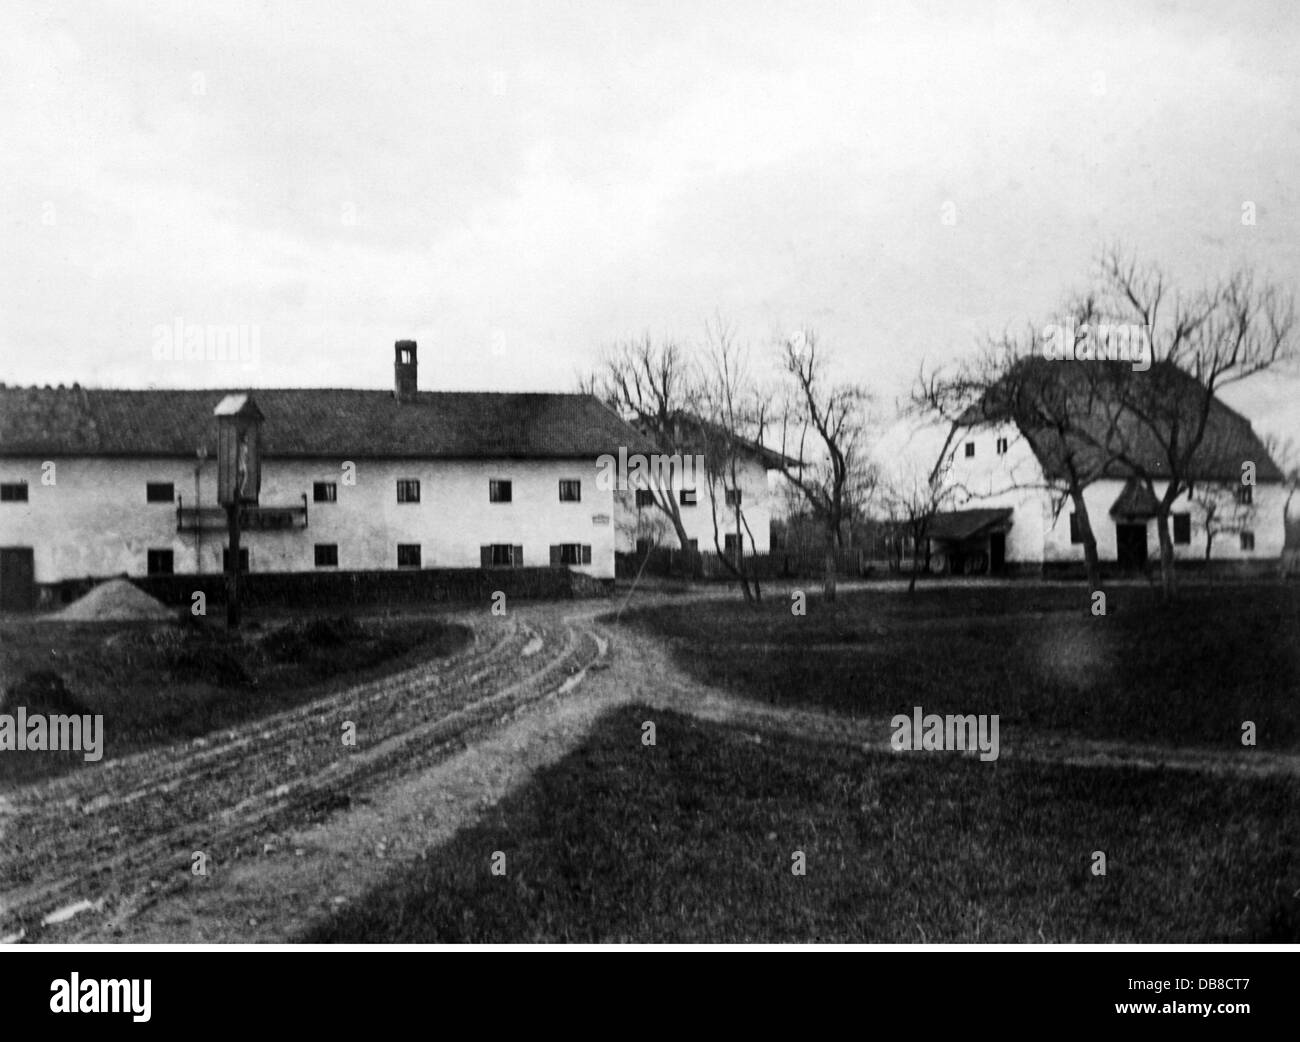 agriculture, farm, farm building, exterior view, circa 1910, Additional-Rights-Clearences-Not Available Stock Photo